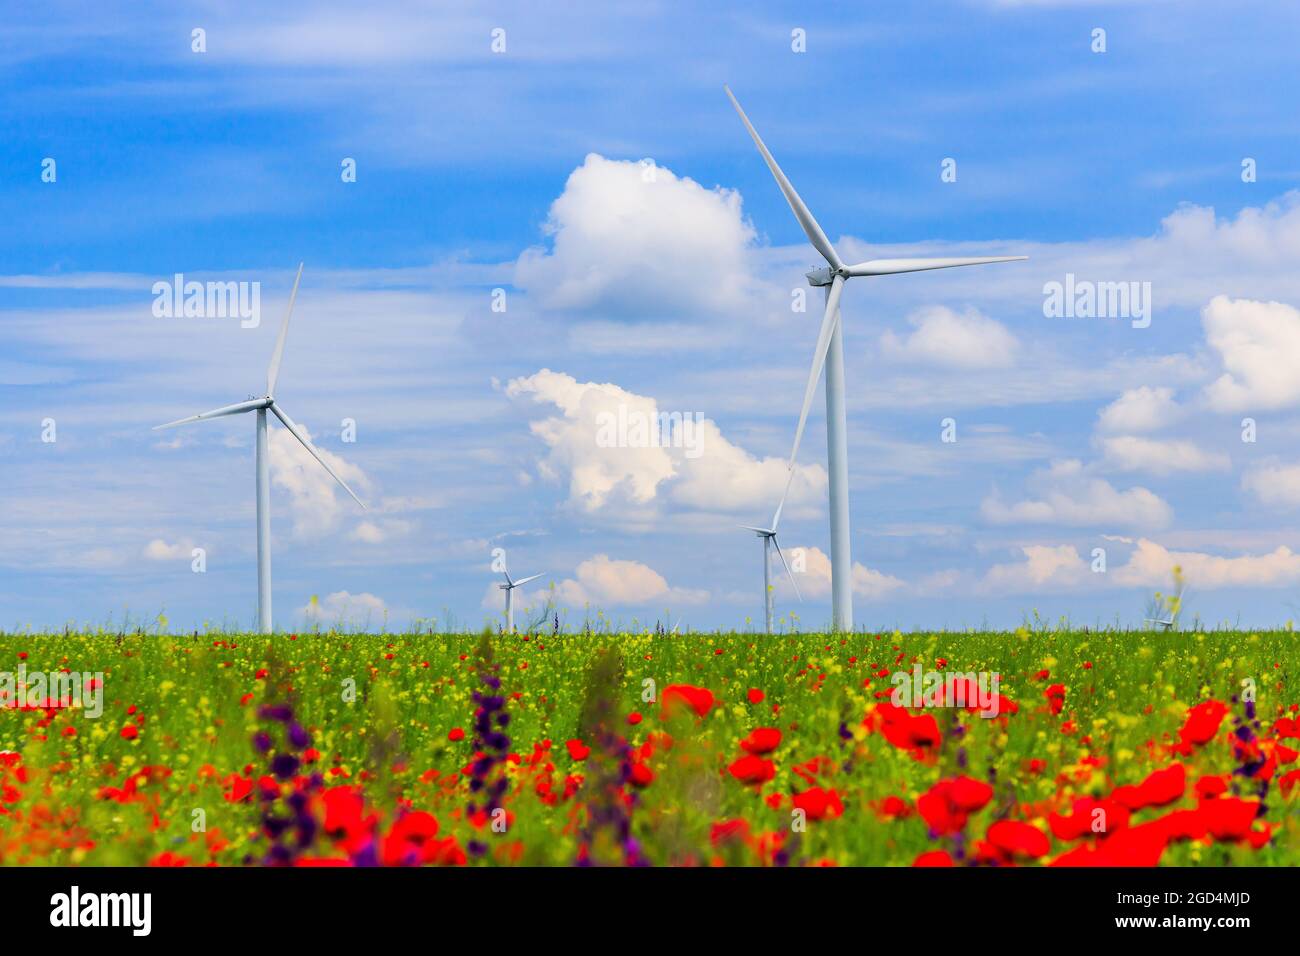 Wind Turbines (renewable energy source) with agriculture field and wild flowers in the foreground. Stock Photo